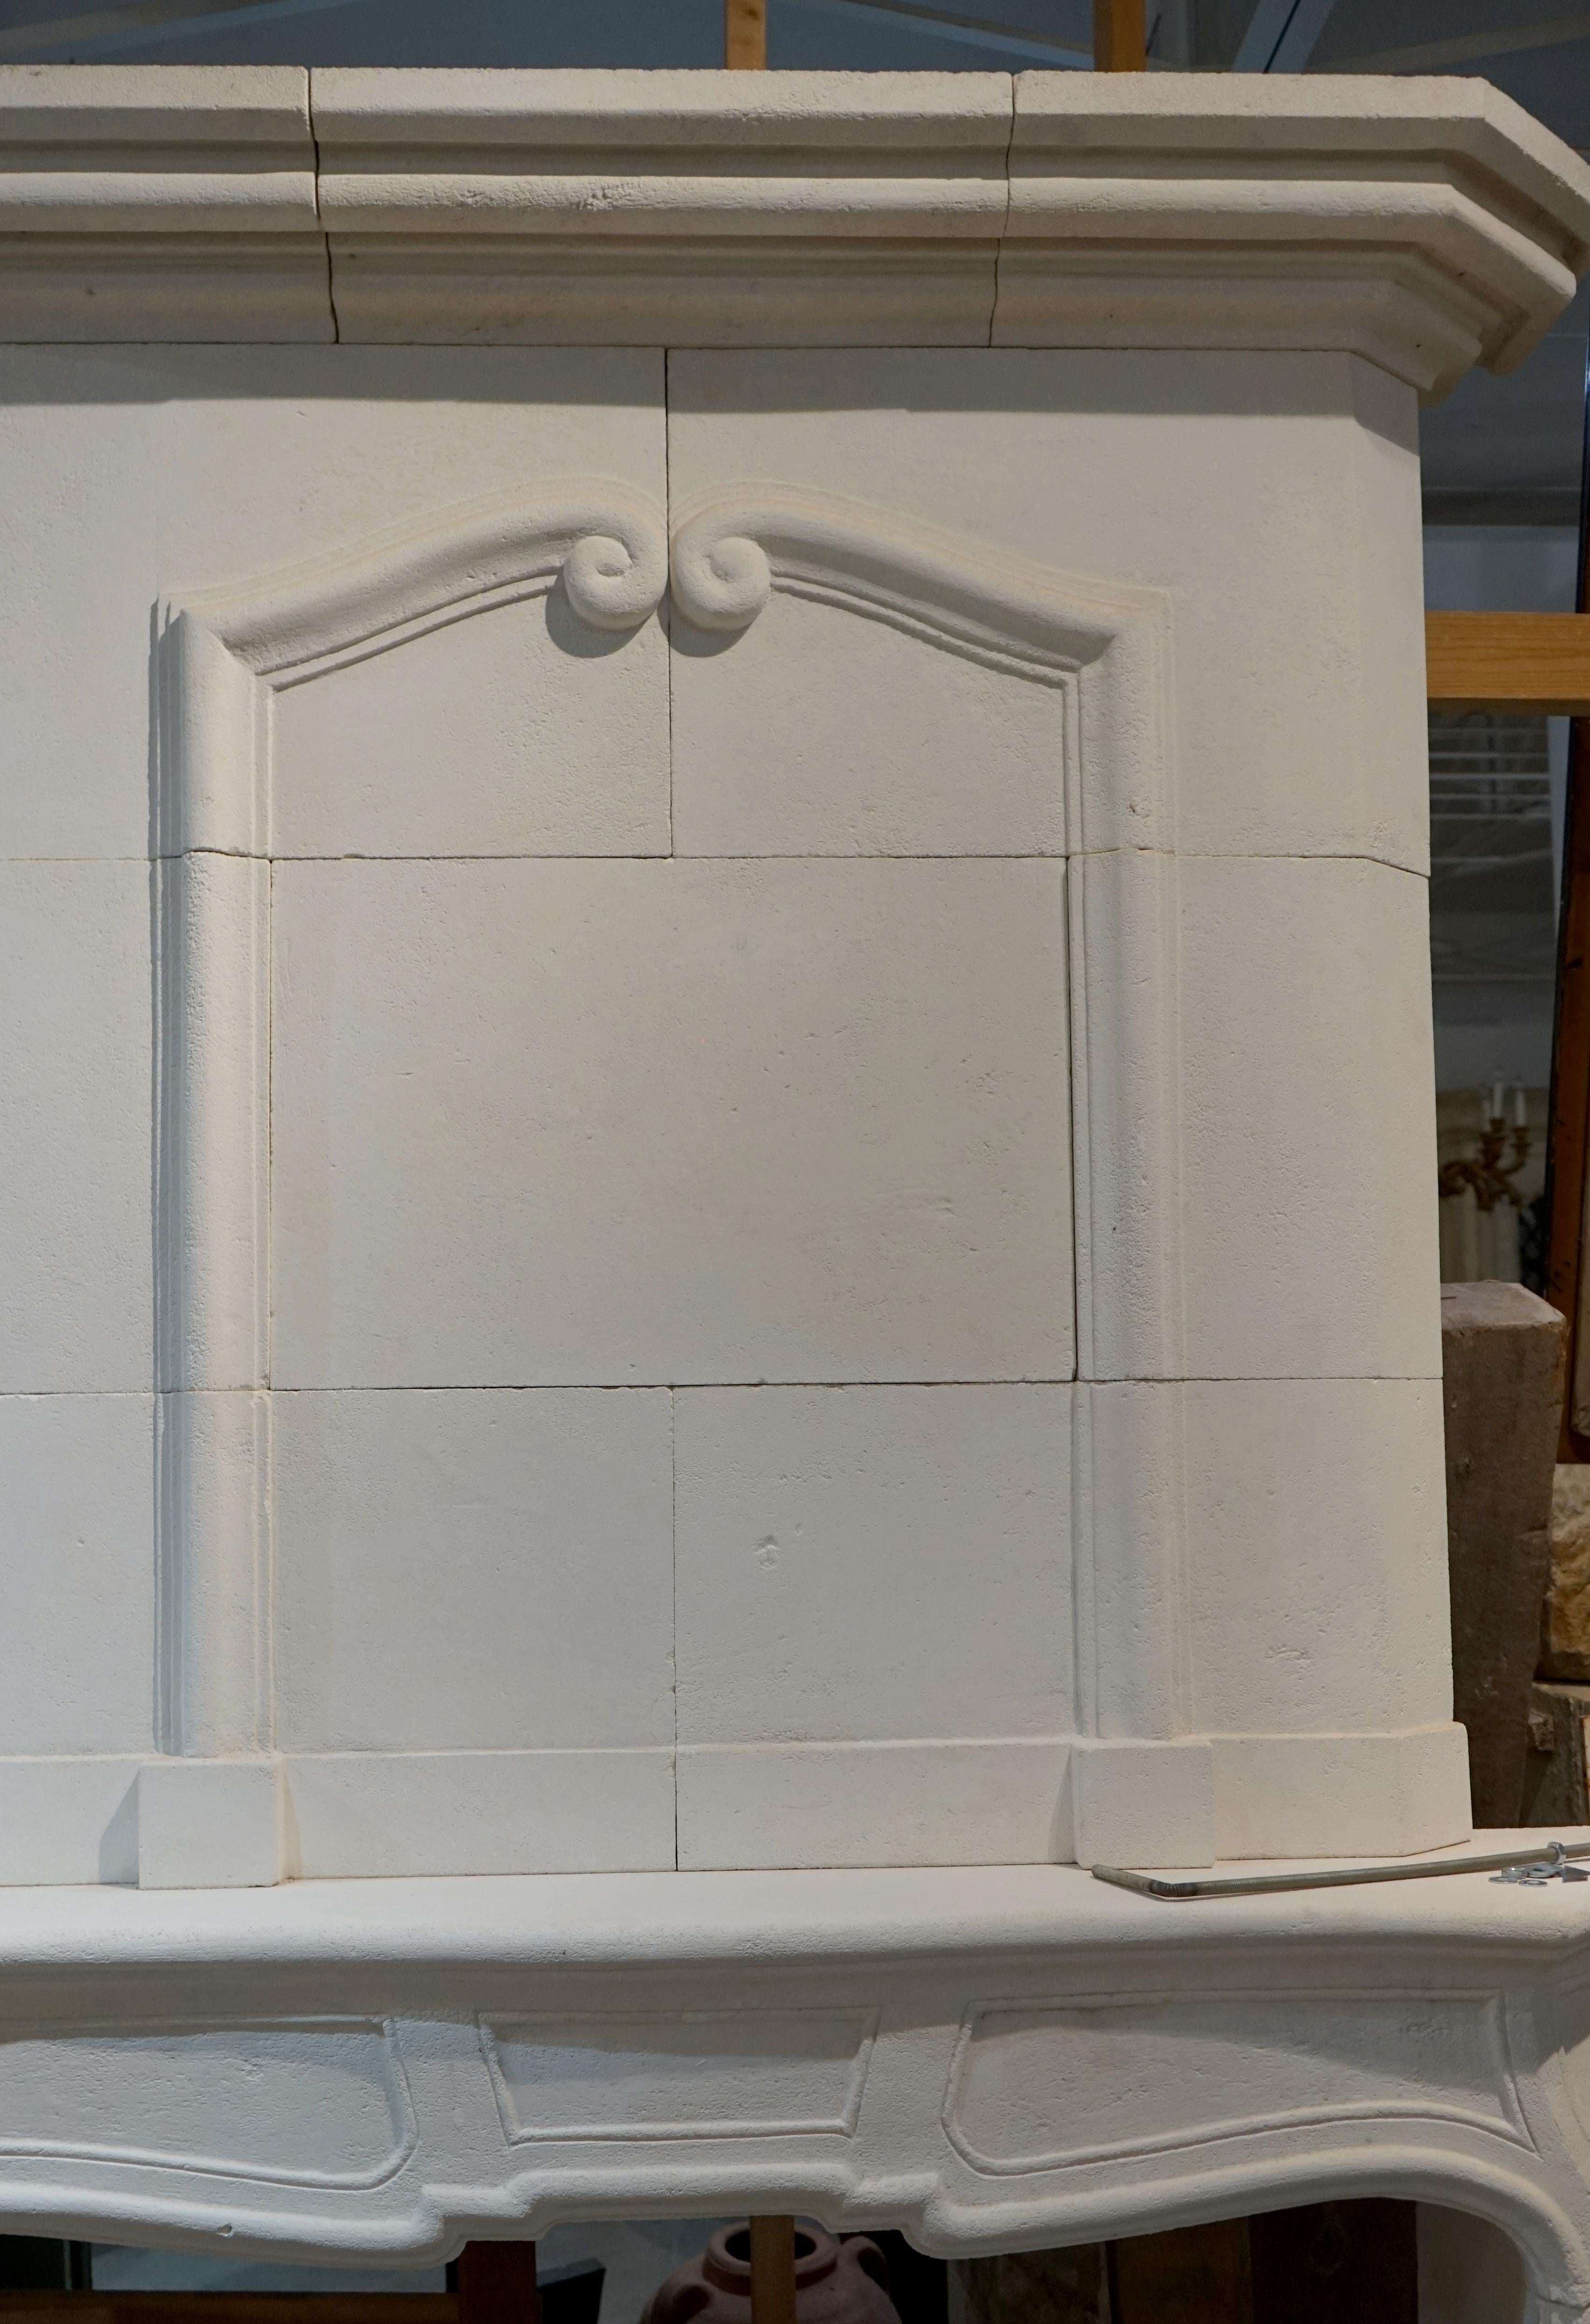 Hand carved from white limestone, this mantel has a scroll-like design at the top of the panel and architectural line along the legs and lentil.

Measurements: 66